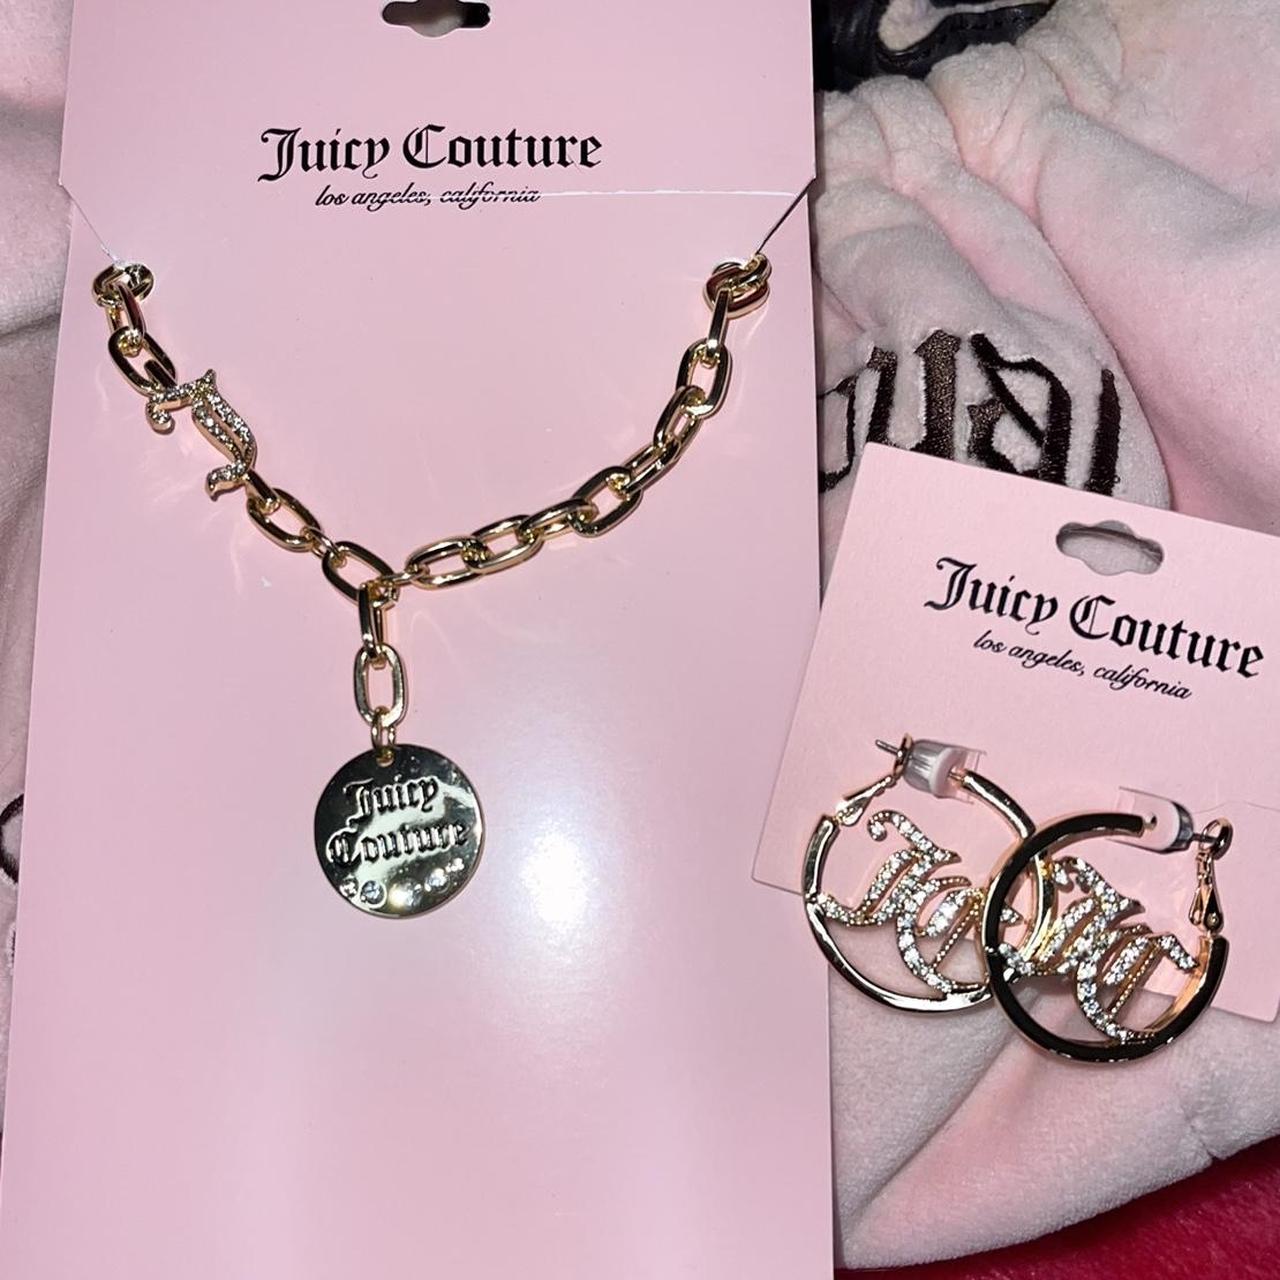 🎀Juicy couture necklace + earring set🎀, Gold juicy